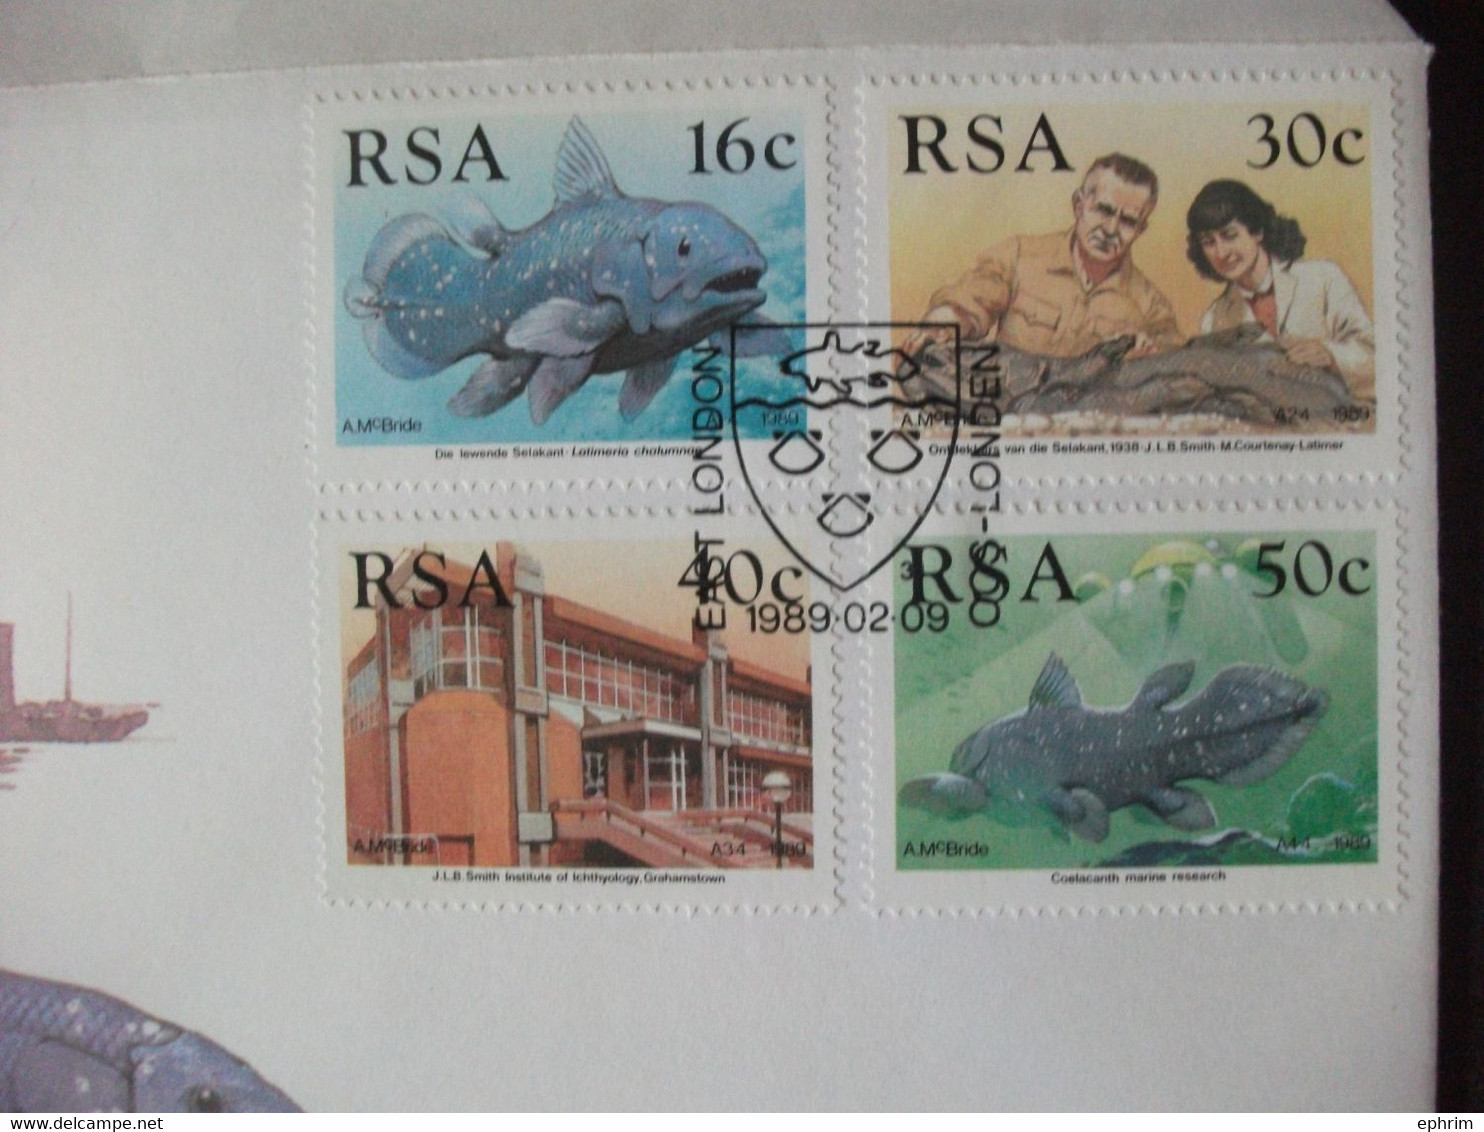 EAST LONDON SOUTH AFRICA ENVELOPPE POISSON FOSSILE TIMBRE COELACANTHE FOSSIL COELACANTH FISH STAMP COVER DIE SELAKANT - Fossielen